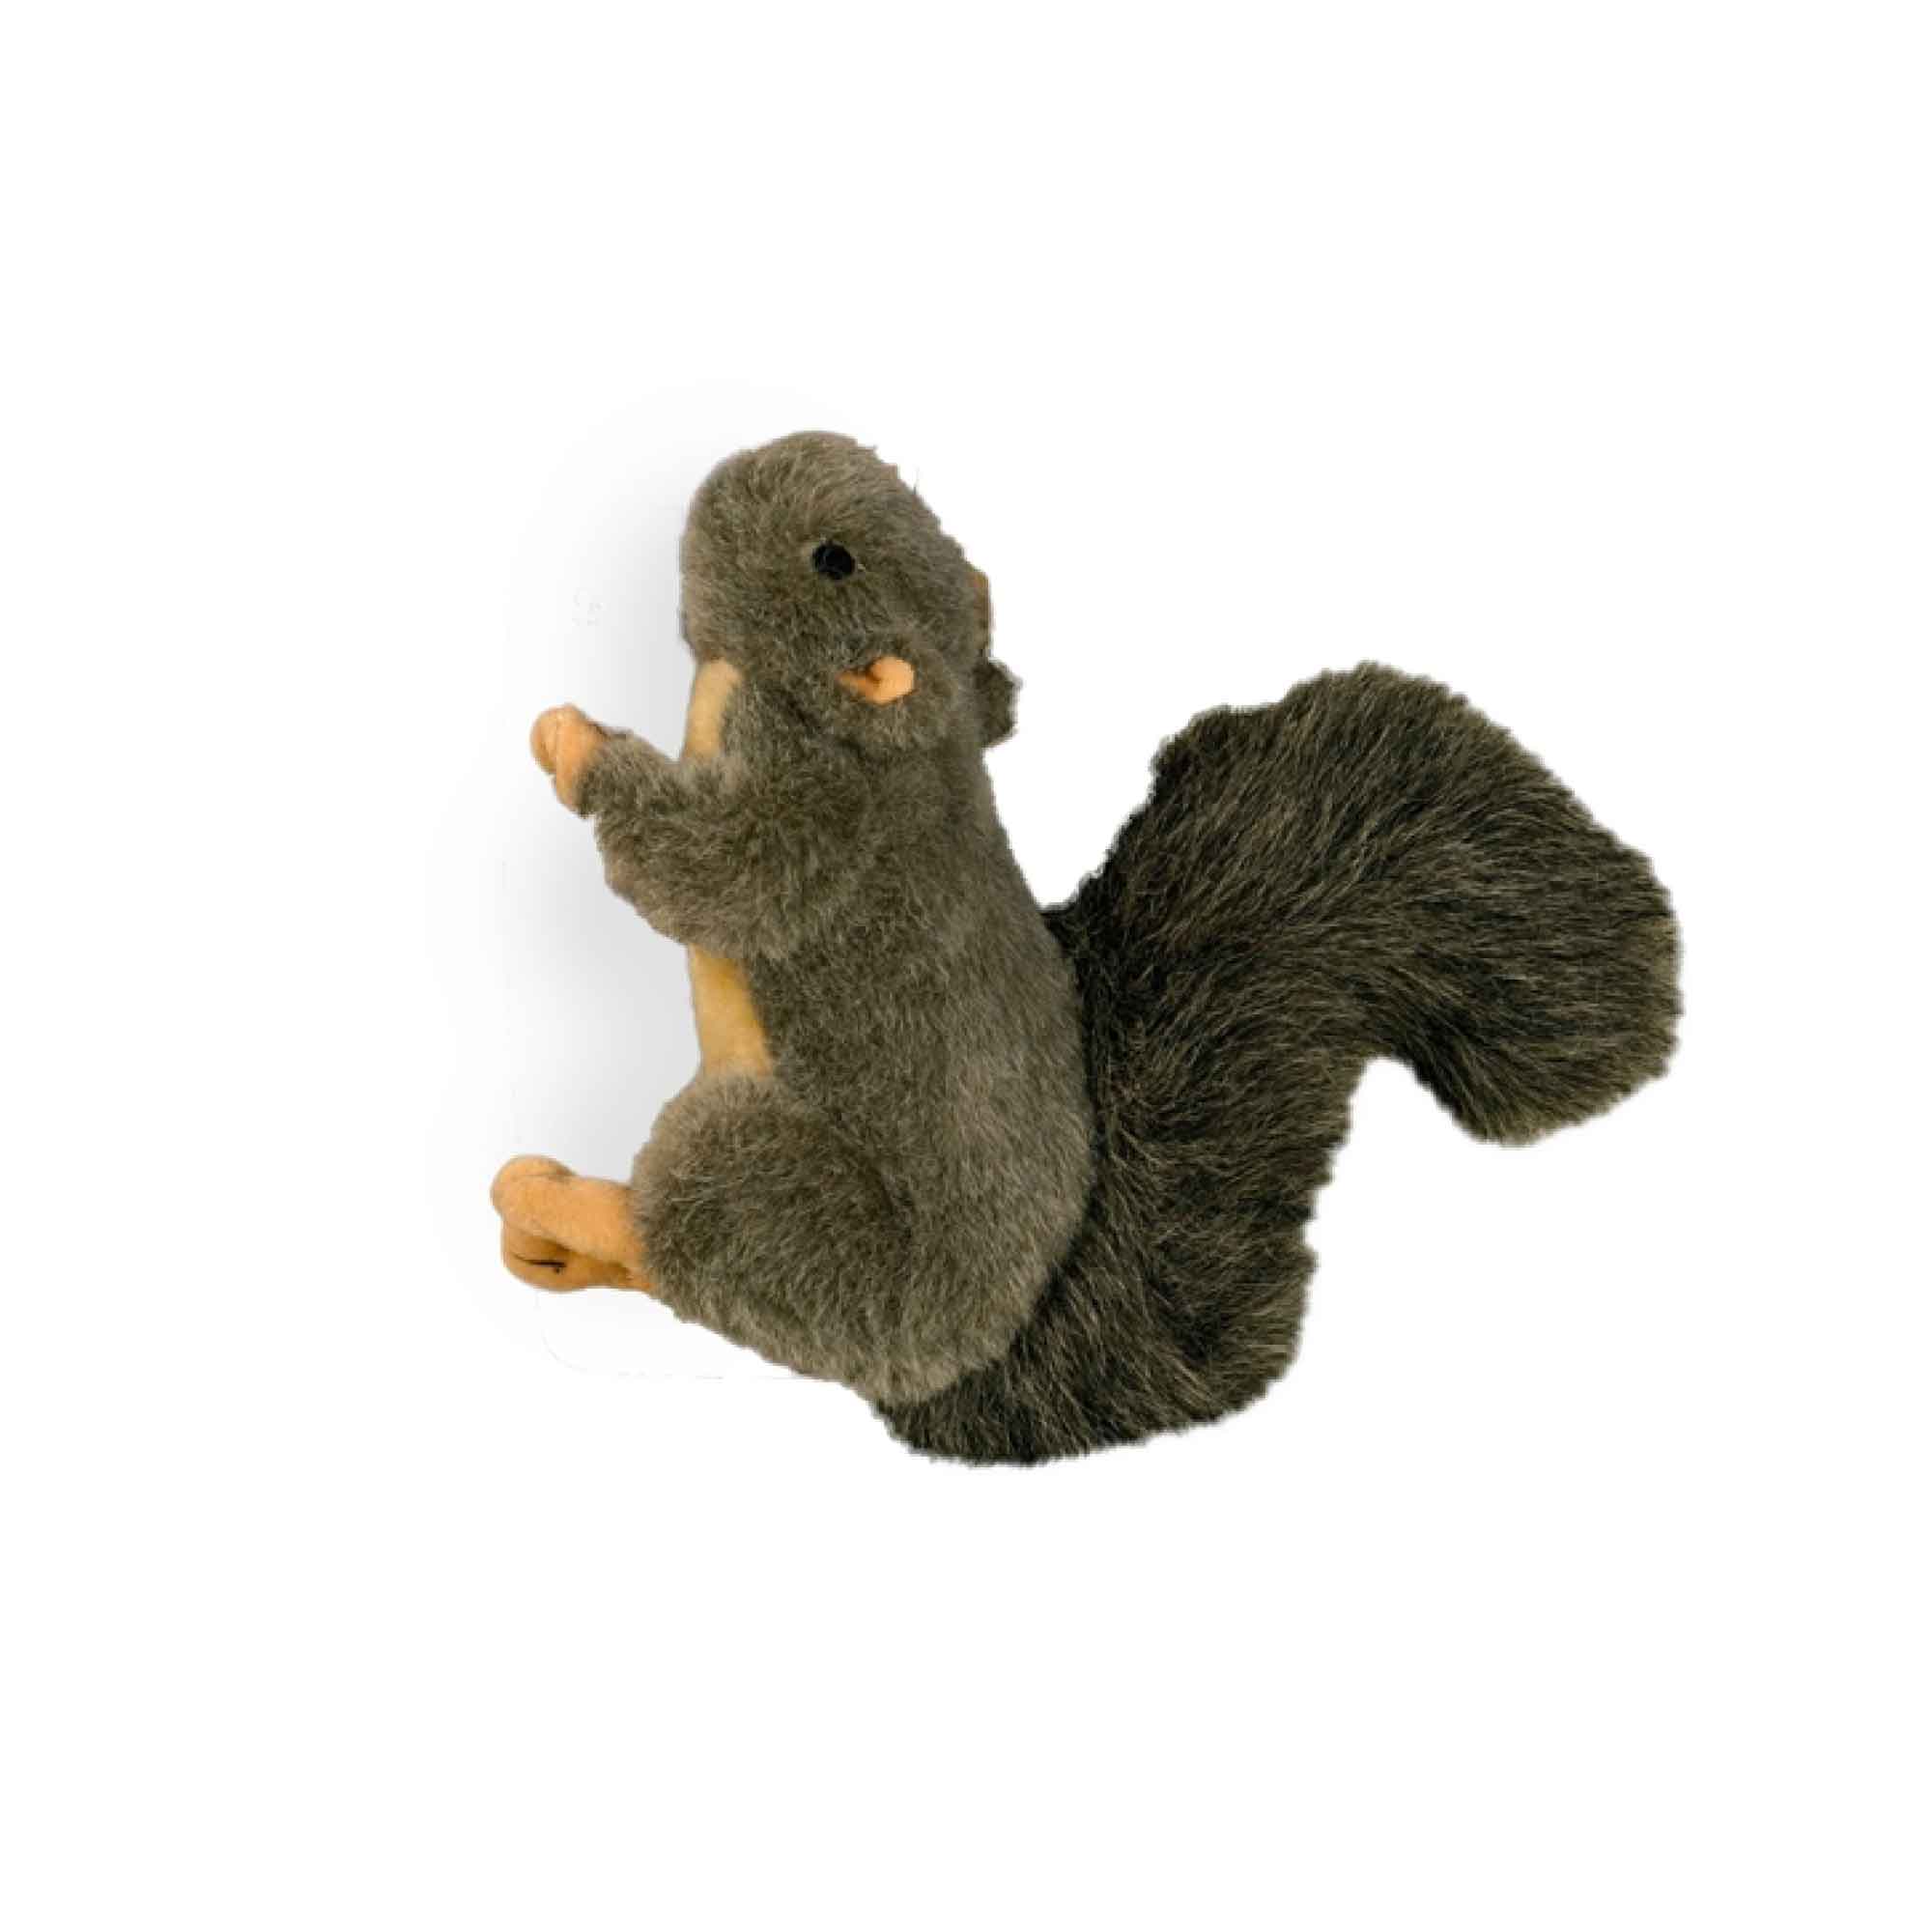 Squirrel dog plush toy - interactive and squeaky